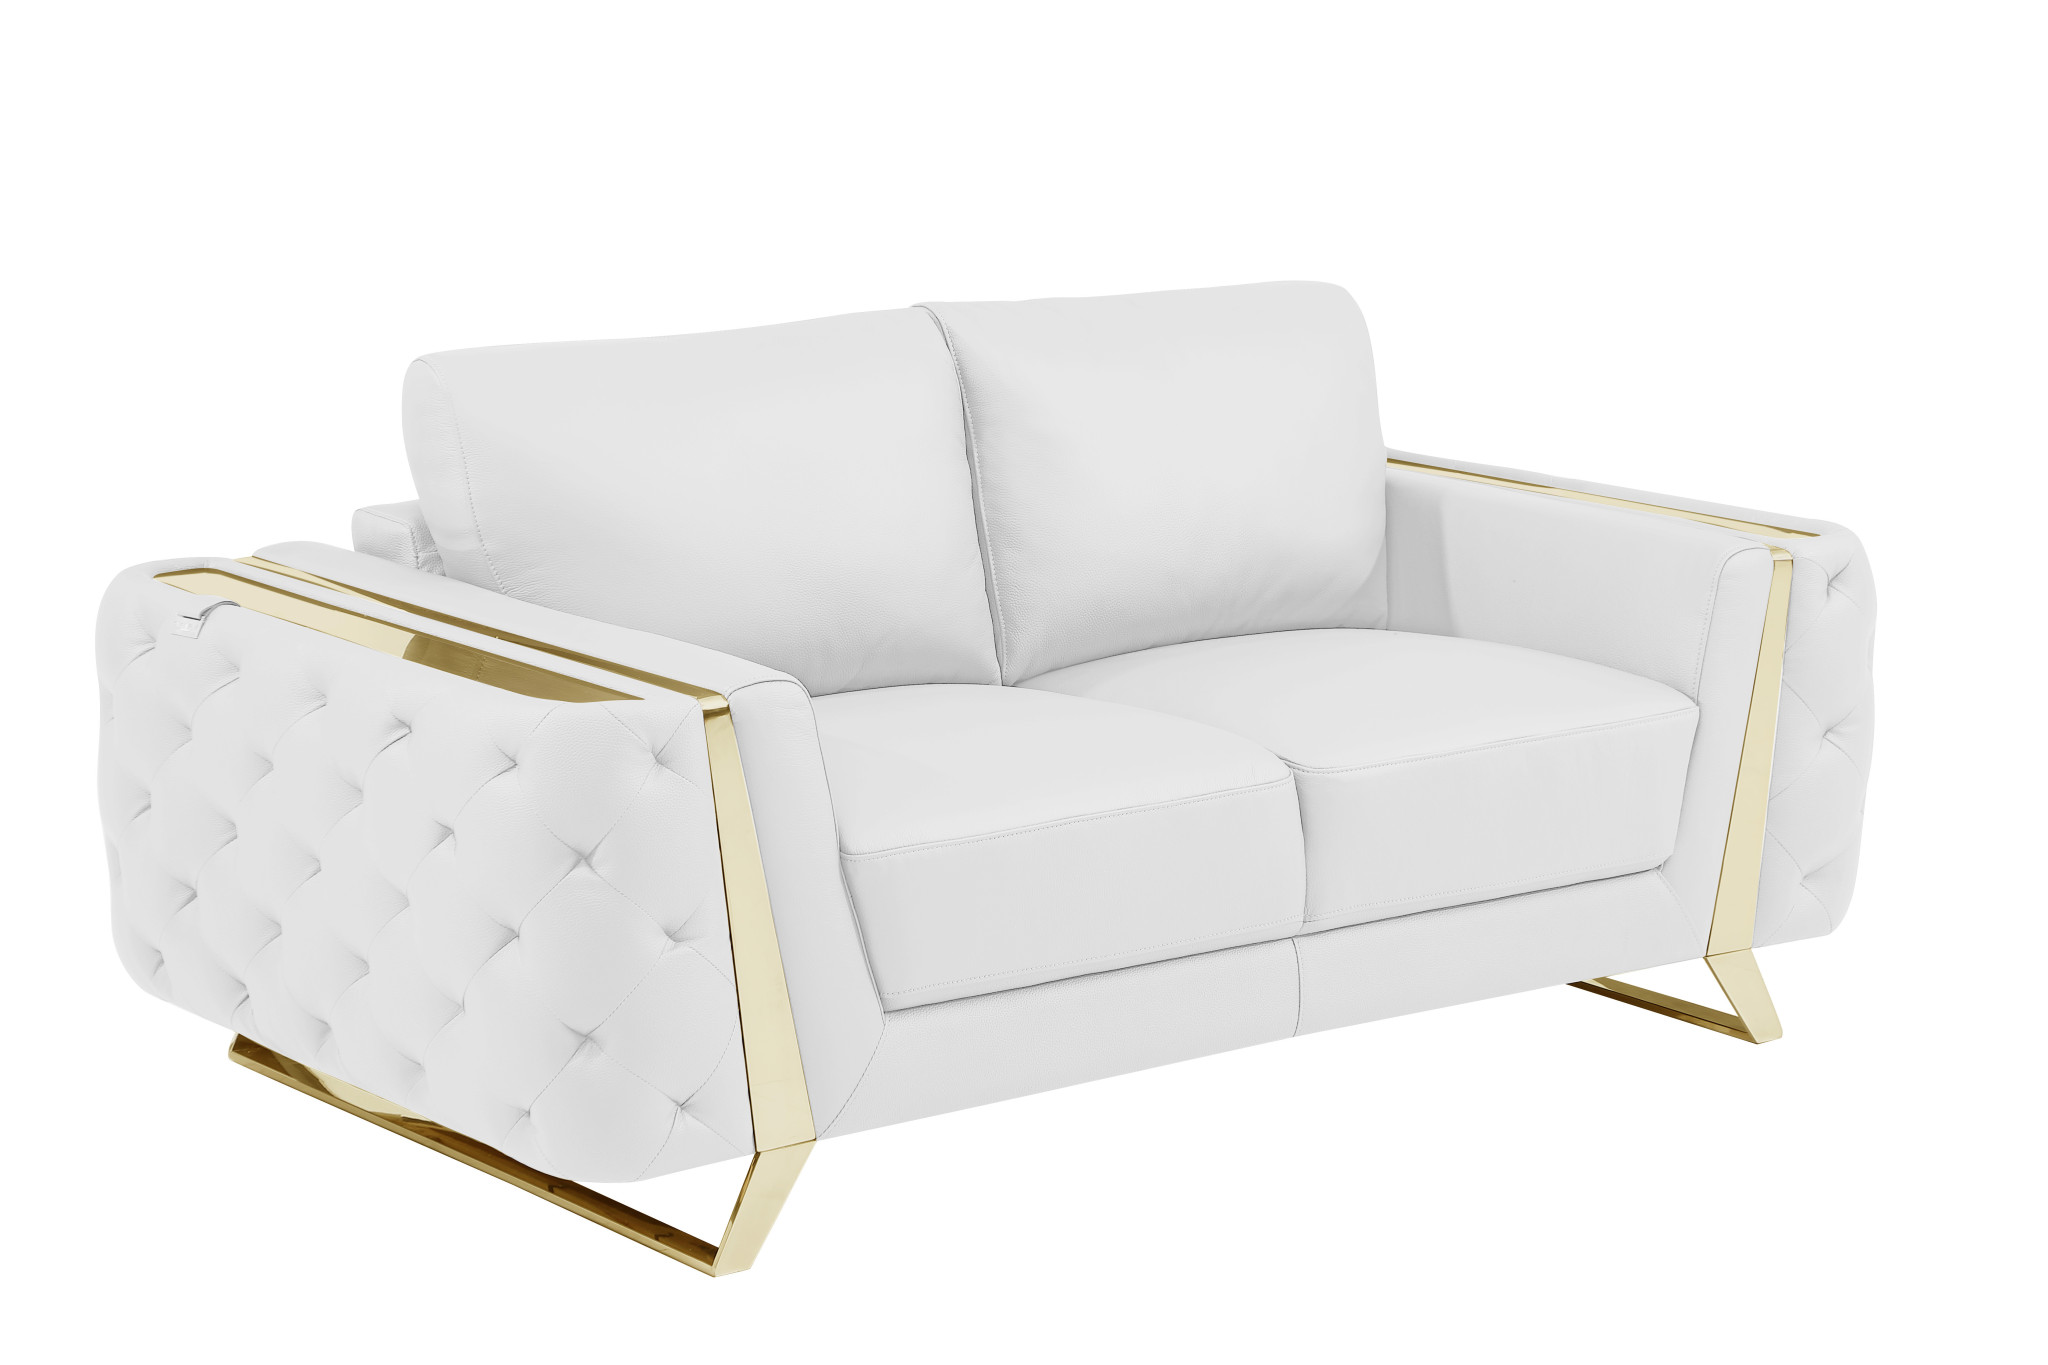 72" White And Gold Genuine Leather Loveseat-518570-1